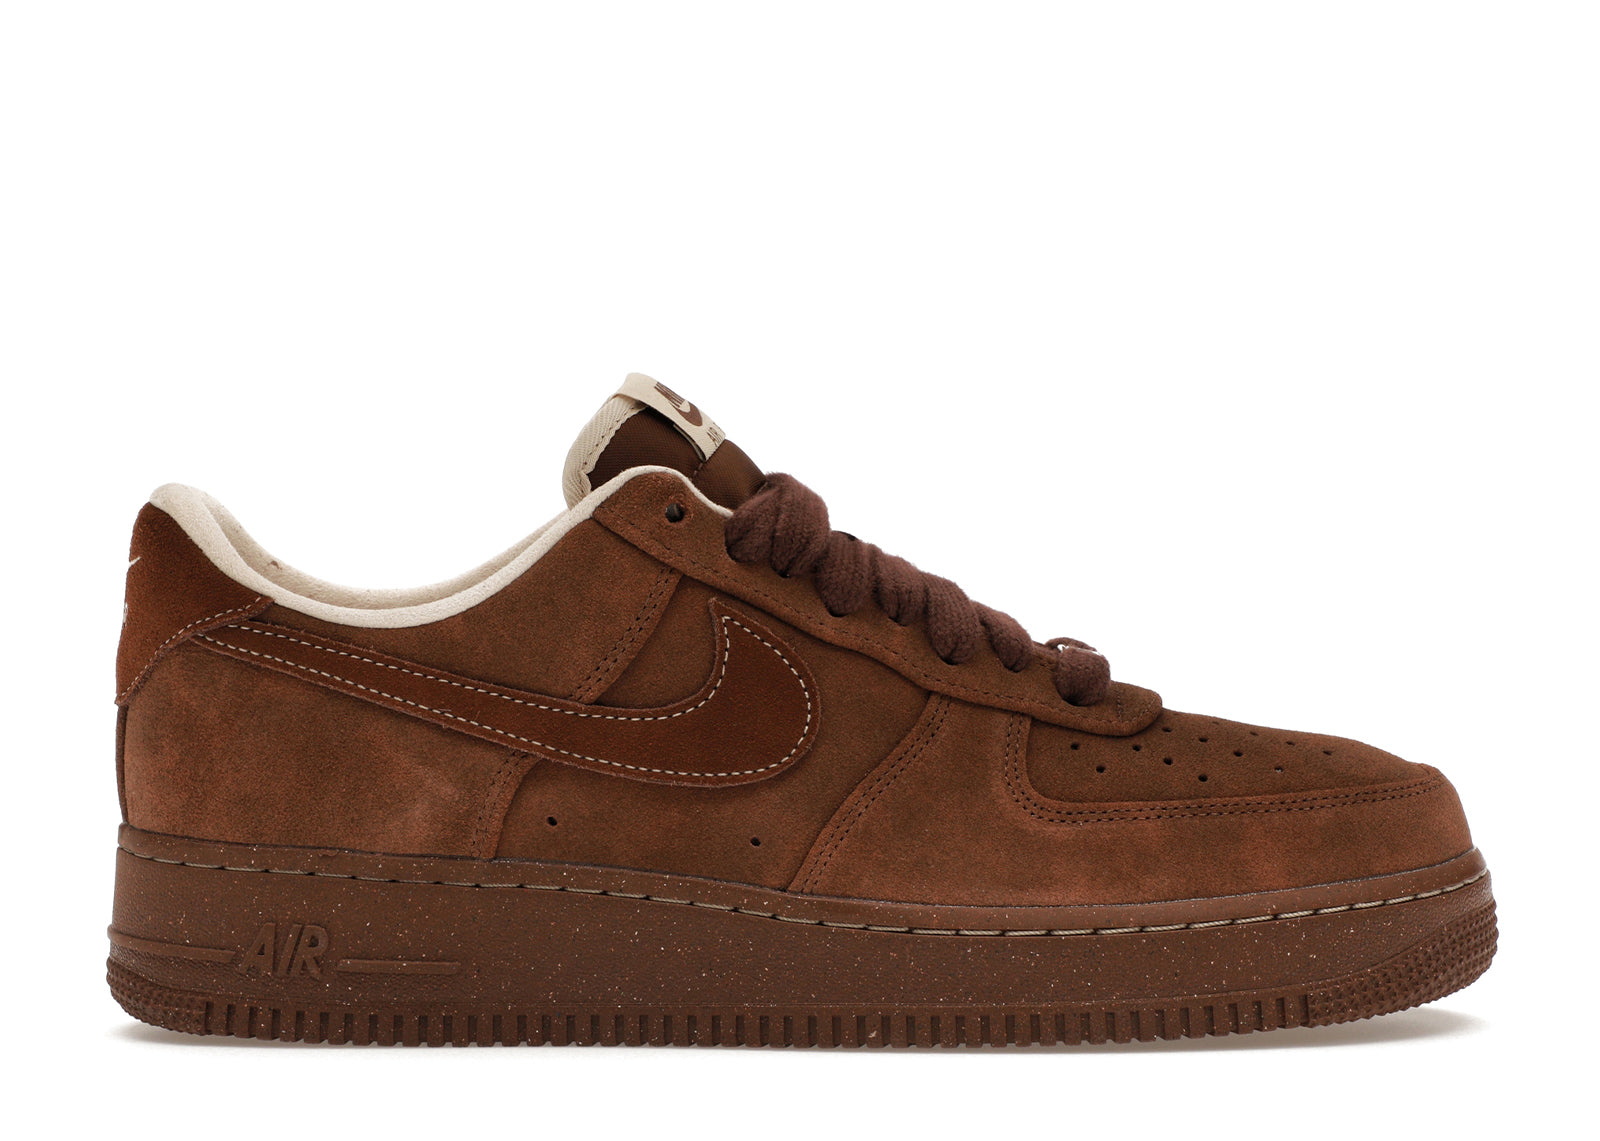 NIKE AIR FORCE 1 LOW '07 SUEDE CACAO WOW (WOMEN'S)